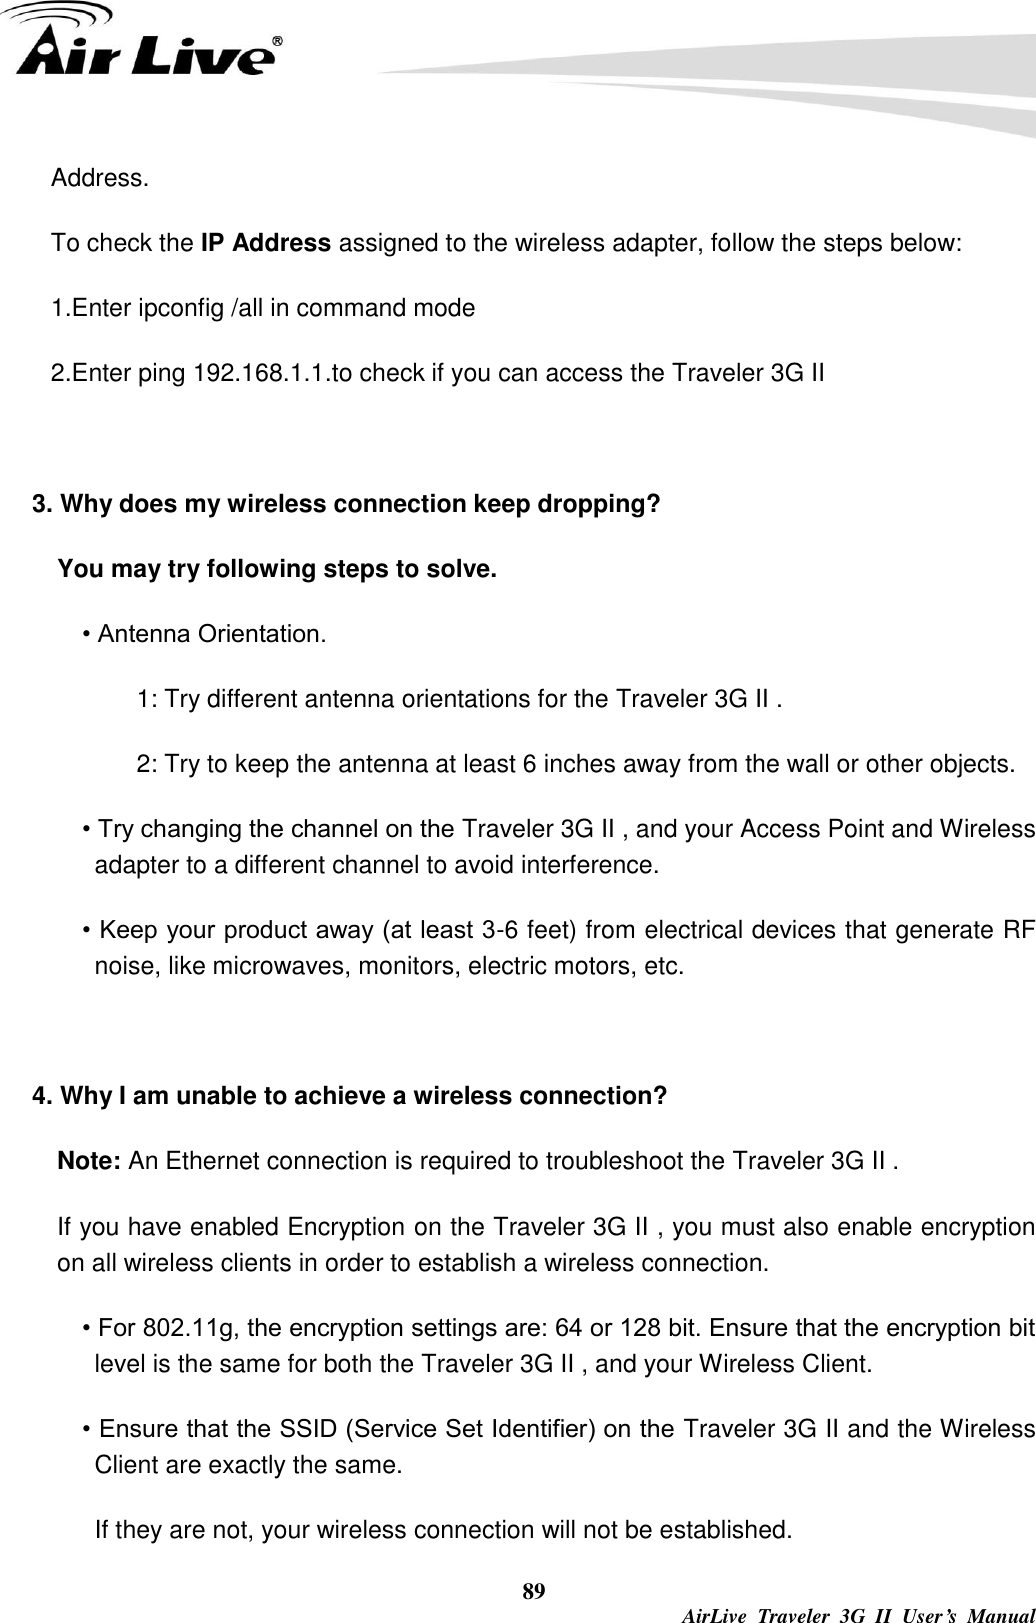   89  AirLive  Traveler  3G  II  User’s  Manual Address. To check the IP Address assigned to the wireless adapter, follow the steps below: 1.Enter ipconfig /all in command mode 2.Enter ping 192.168.1.1.to check if you can access the Traveler 3G II    3. Why does my wireless connection keep dropping?   You may try following steps to solve.   • Antenna Orientation.   1: Try different antenna orientations for the Traveler 3G II . 2: Try to keep the antenna at least 6 inches away from the wall or other objects. • Try changing the channel on the Traveler 3G II , and your Access Point and Wireless adapter to a different channel to avoid interference. • Keep your product away (at least 3-6 feet) from electrical devices that generate RF noise, like microwaves, monitors, electric motors, etc.  4. Why I am unable to achieve a wireless connection? Note: An Ethernet connection is required to troubleshoot the Traveler 3G II . If you have enabled Encryption on the Traveler 3G II , you must also enable encryption on all wireless clients in order to establish a wireless connection. • For 802.11g, the encryption settings are: 64 or 128 bit. Ensure that the encryption bit level is the same for both the Traveler 3G II , and your Wireless Client. • Ensure that the SSID (Service Set Identifier) on the Traveler 3G II and the Wireless Client are exactly the same. If they are not, your wireless connection will not be established. 